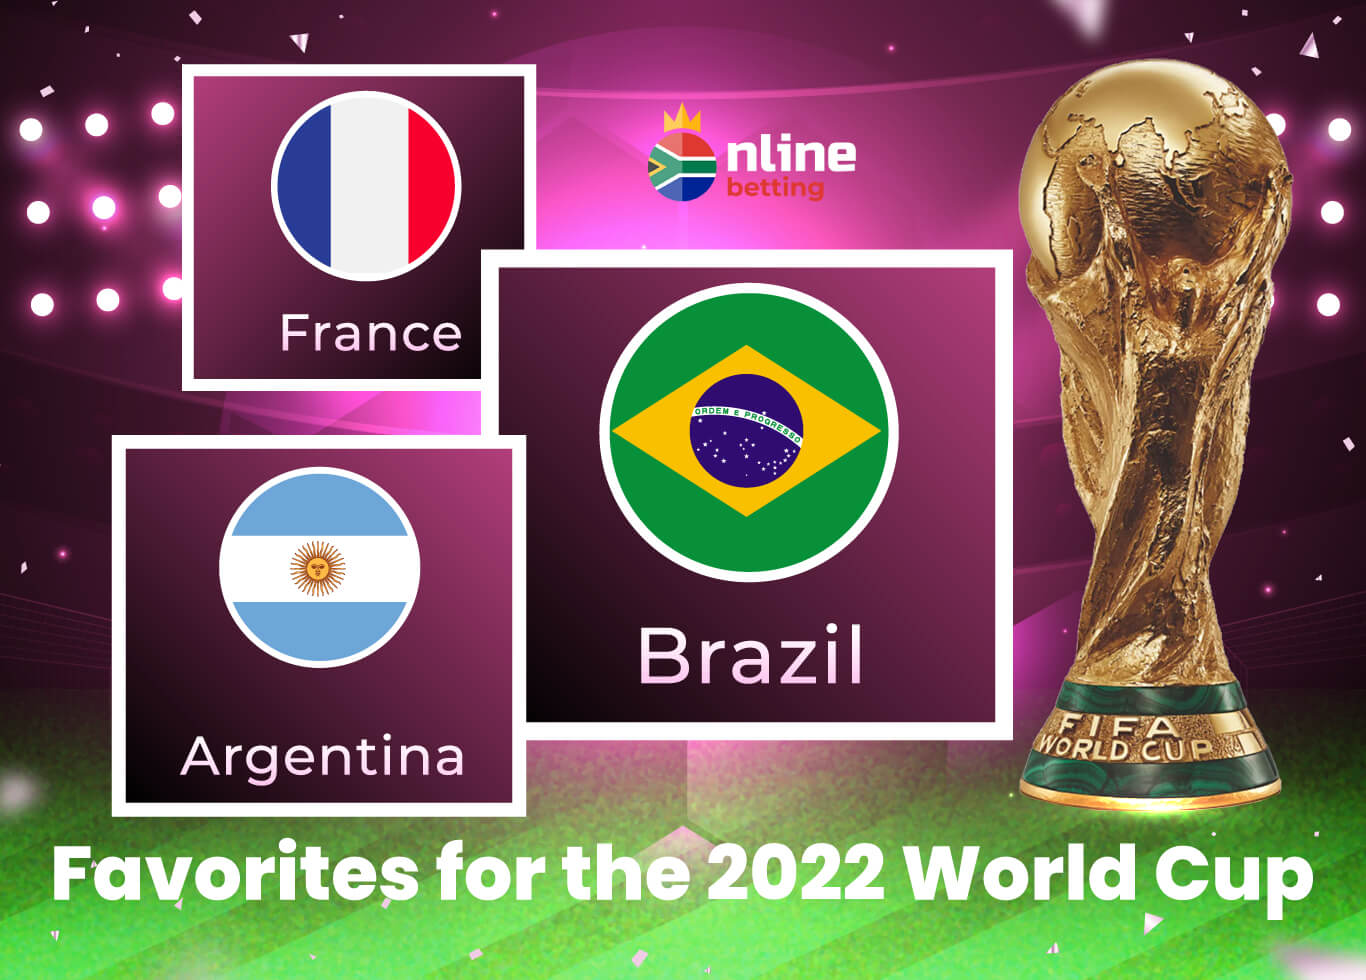 Favorites for the 2022 World Cup